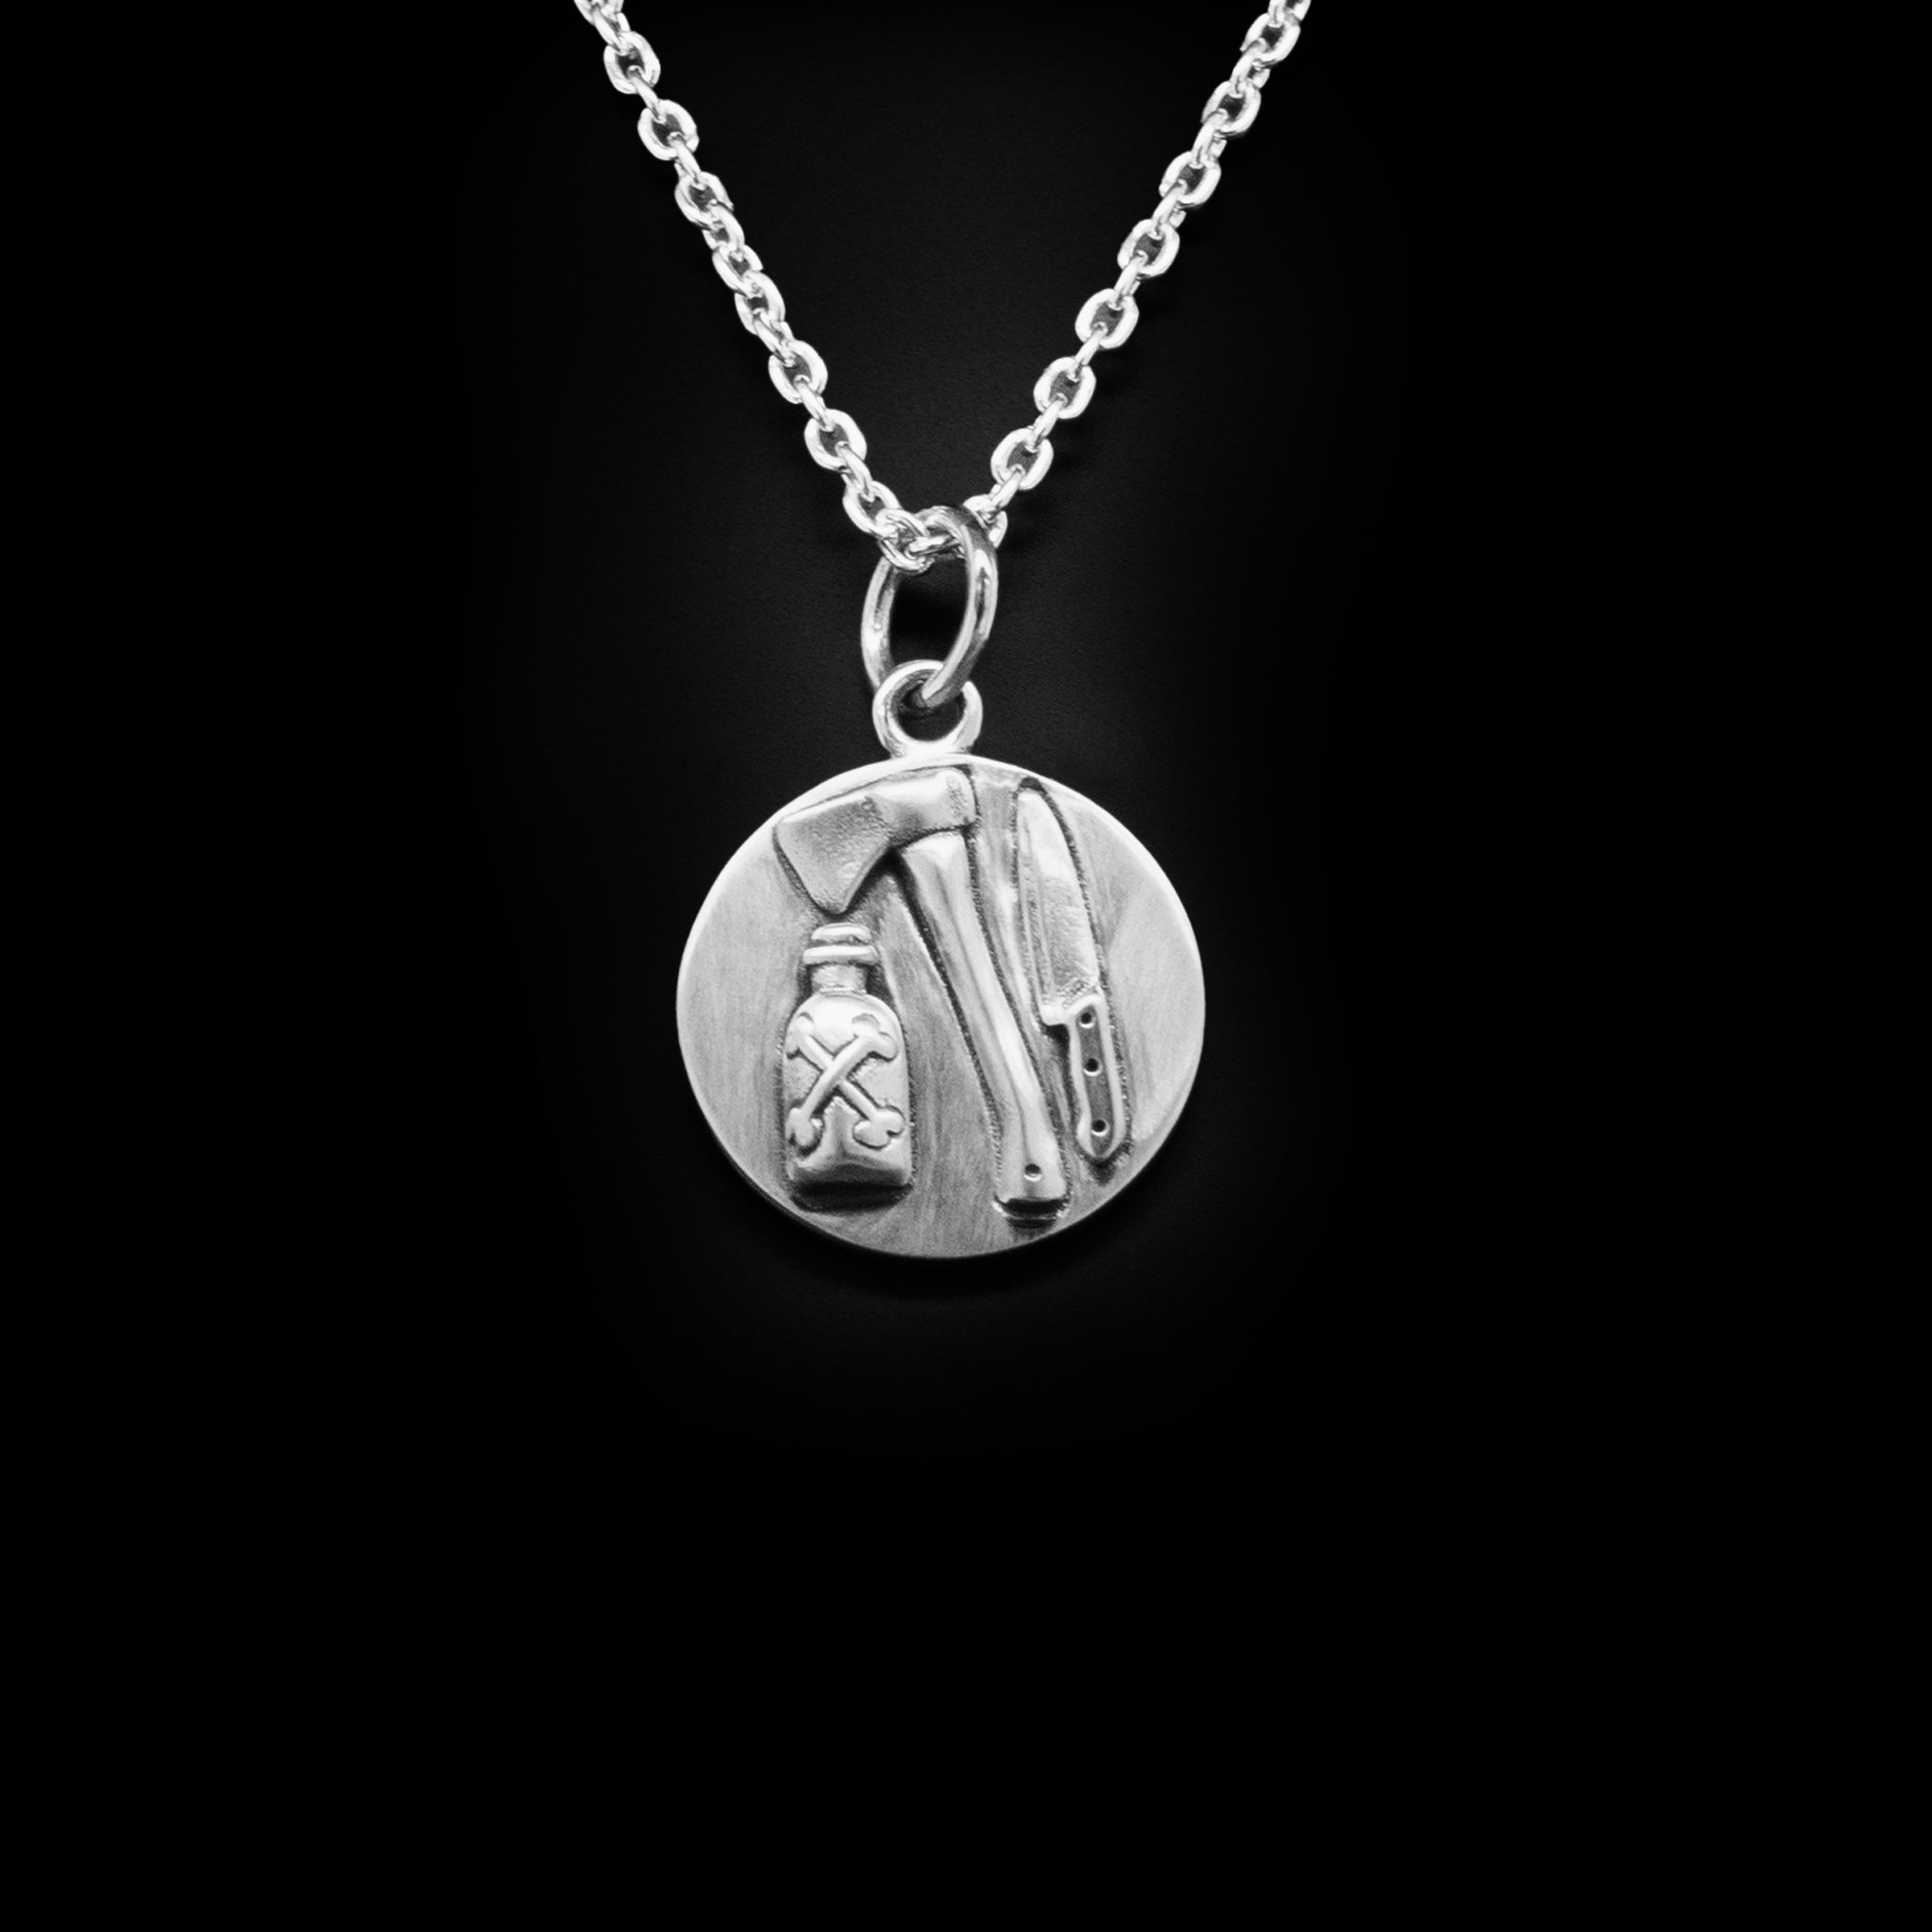 silver charm for necklace